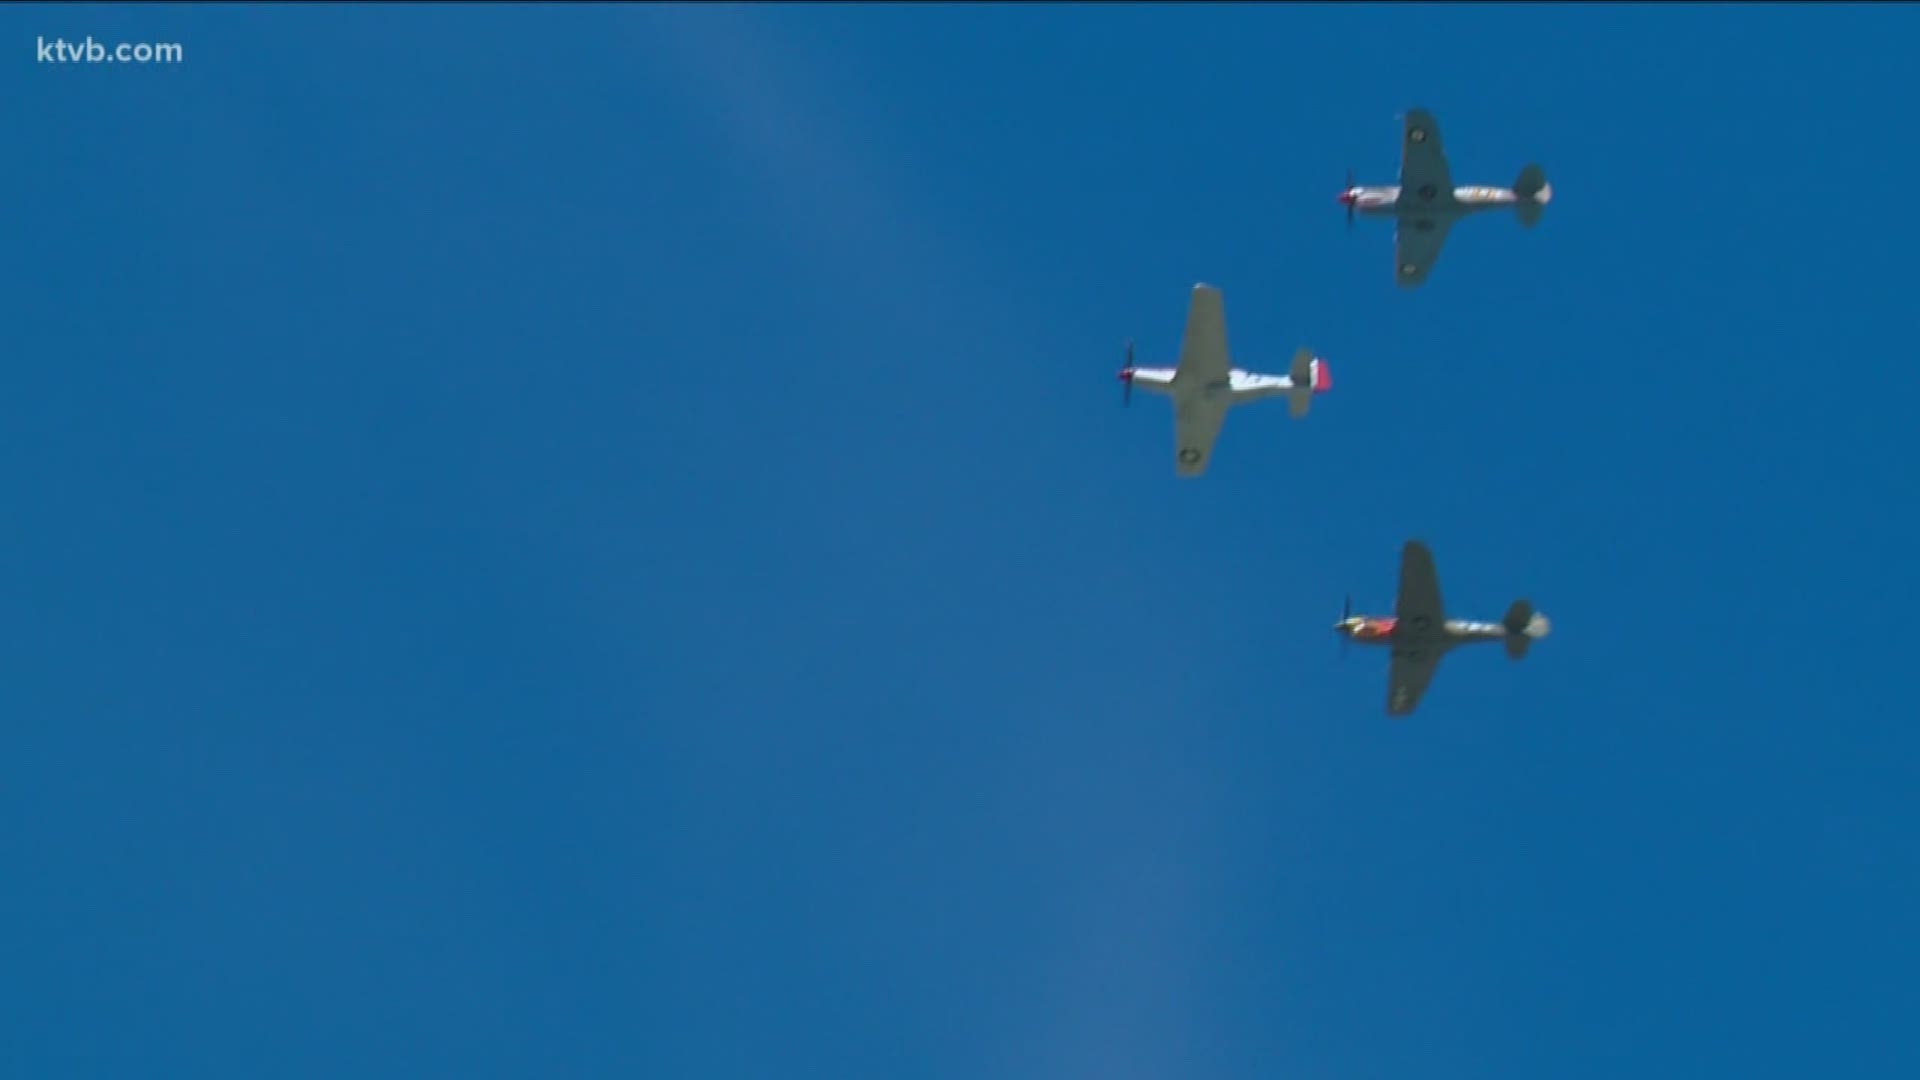 The flyover was part of the Warhawk Air Museum's Memorial Day celebration.